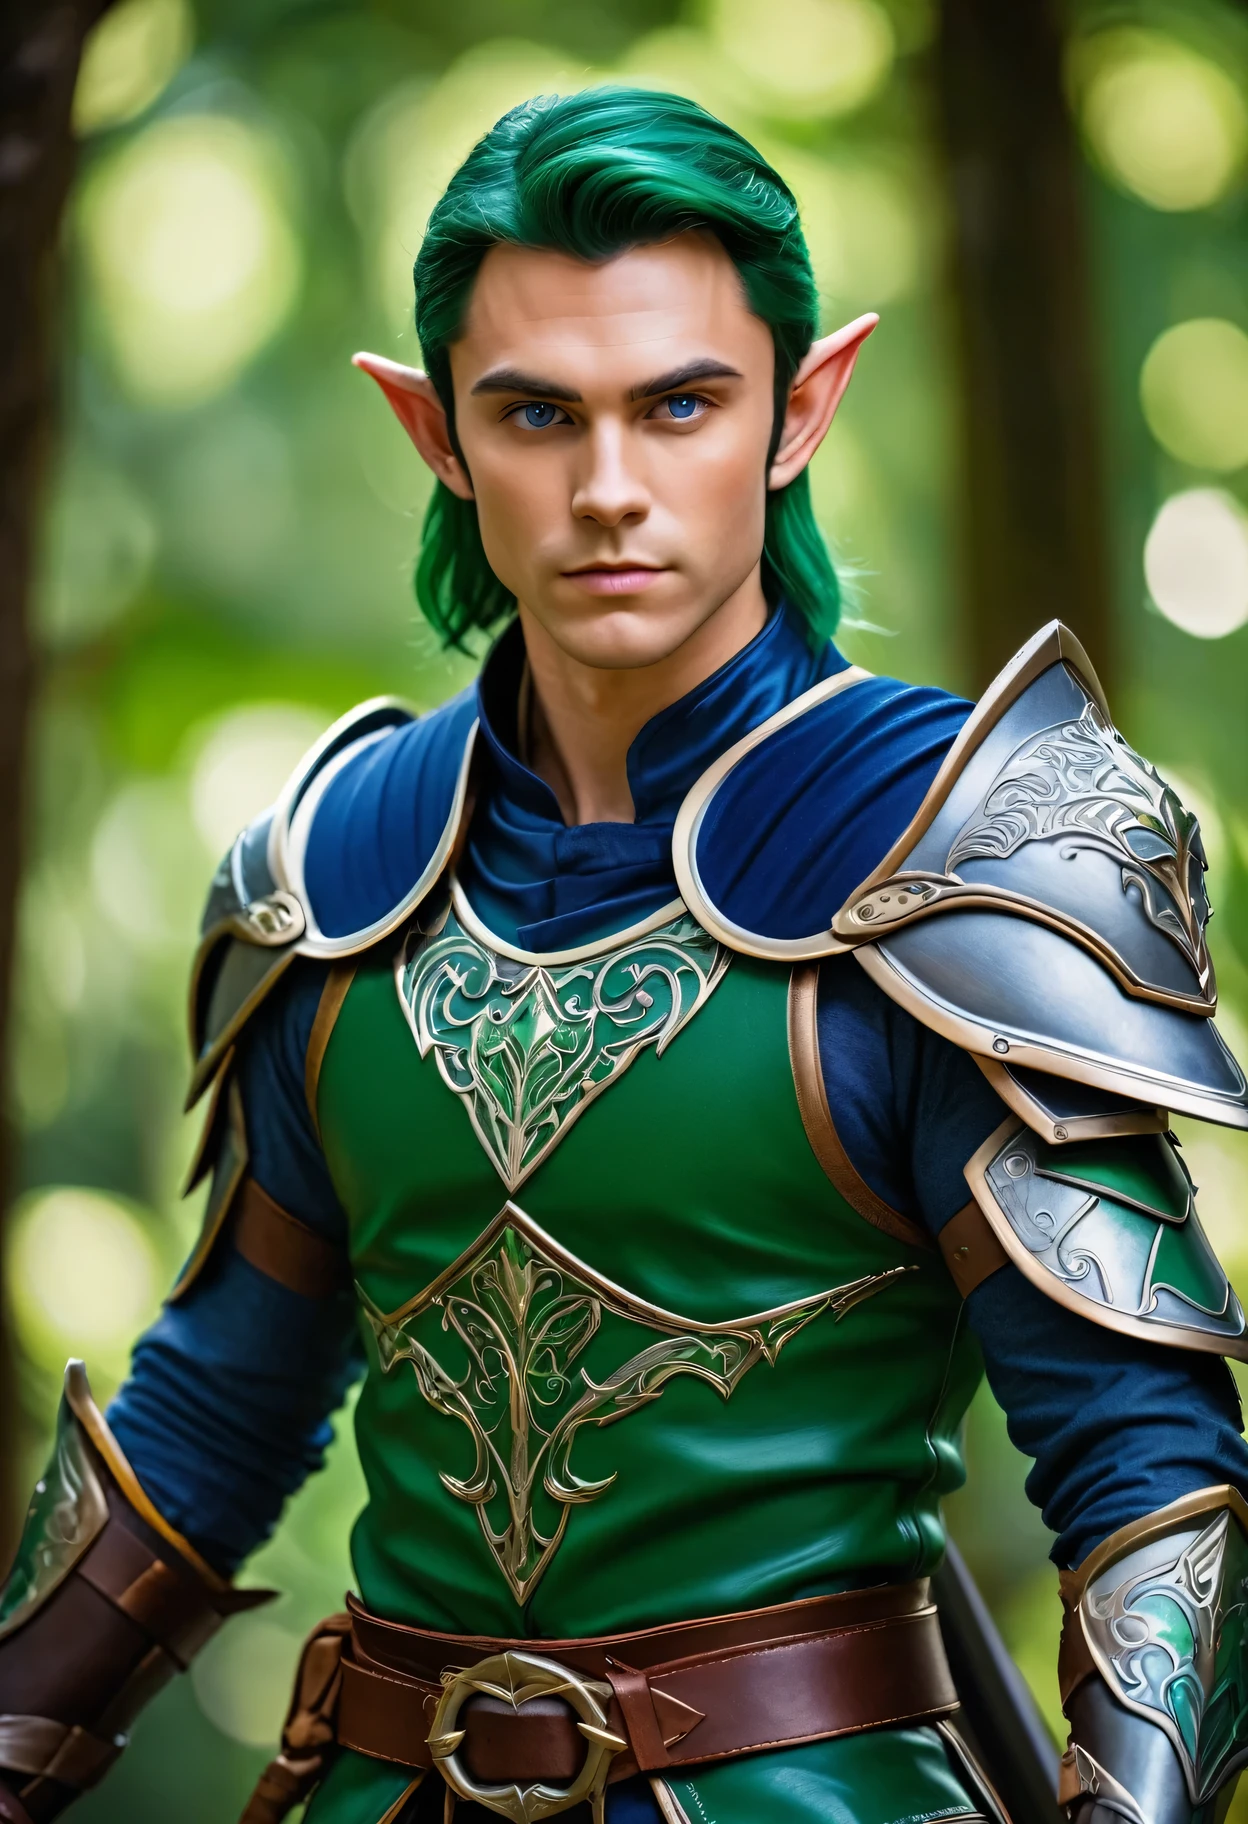 ProFessional photography For an elite magazine, An ElF warrior in gorgeous armor with intricate green painting, An ElF warrior posing, an elF blade made oF blue steel in his hand, an ElF warrior looking at the viewer, Full pose, Full body, swordsman's Fighting stance, leicht zusammengekniffene Augen, Canon EOS R5 Kamera mit Canon RF 100-500 mm F4 Objektiv.5-7.1L IS USM, 500 mm, 1/500 Sek.., F/7.1 und ISO 1000.